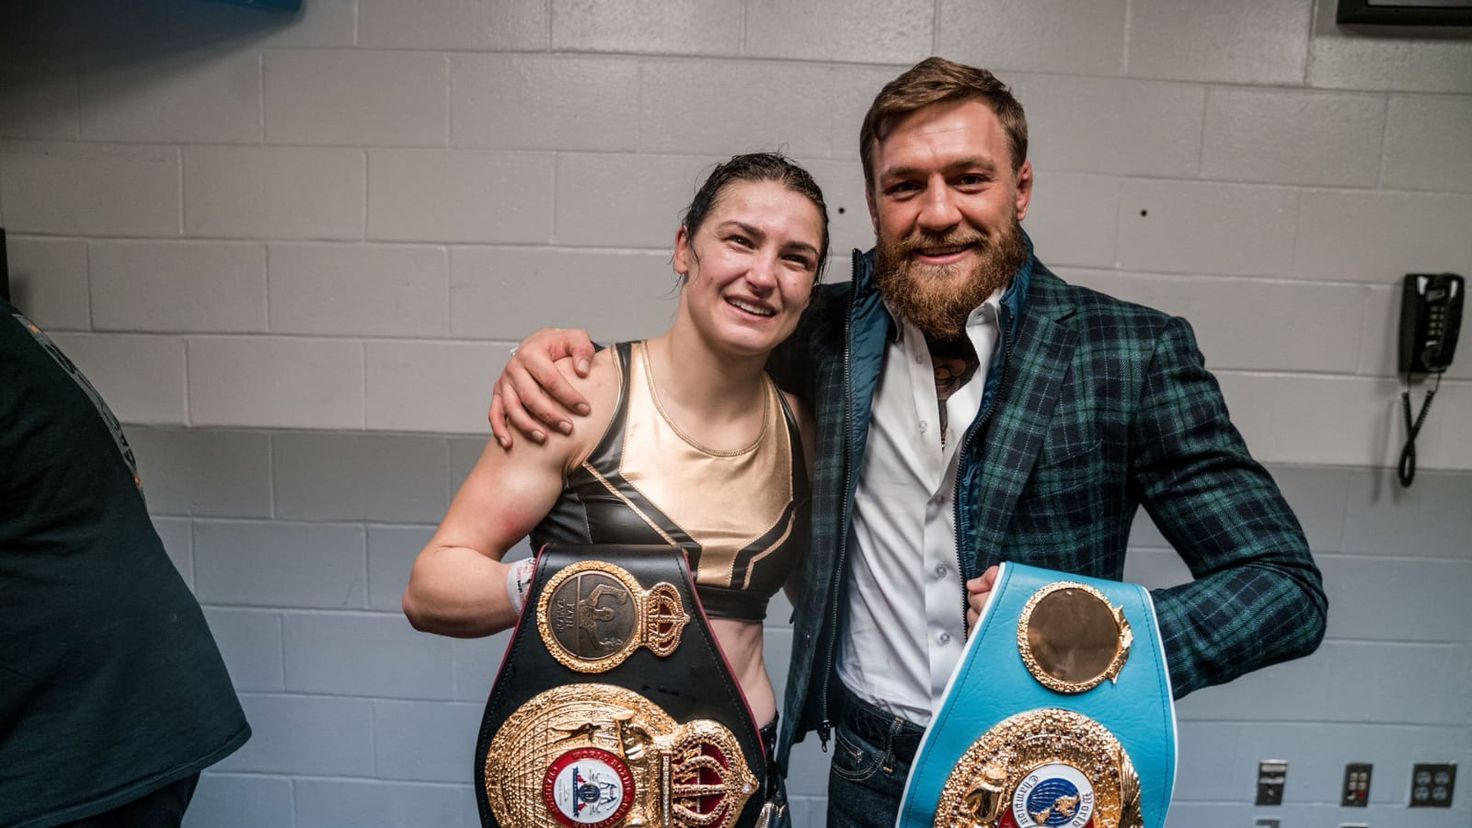 Conor McGregor's support for Katie Taylor
